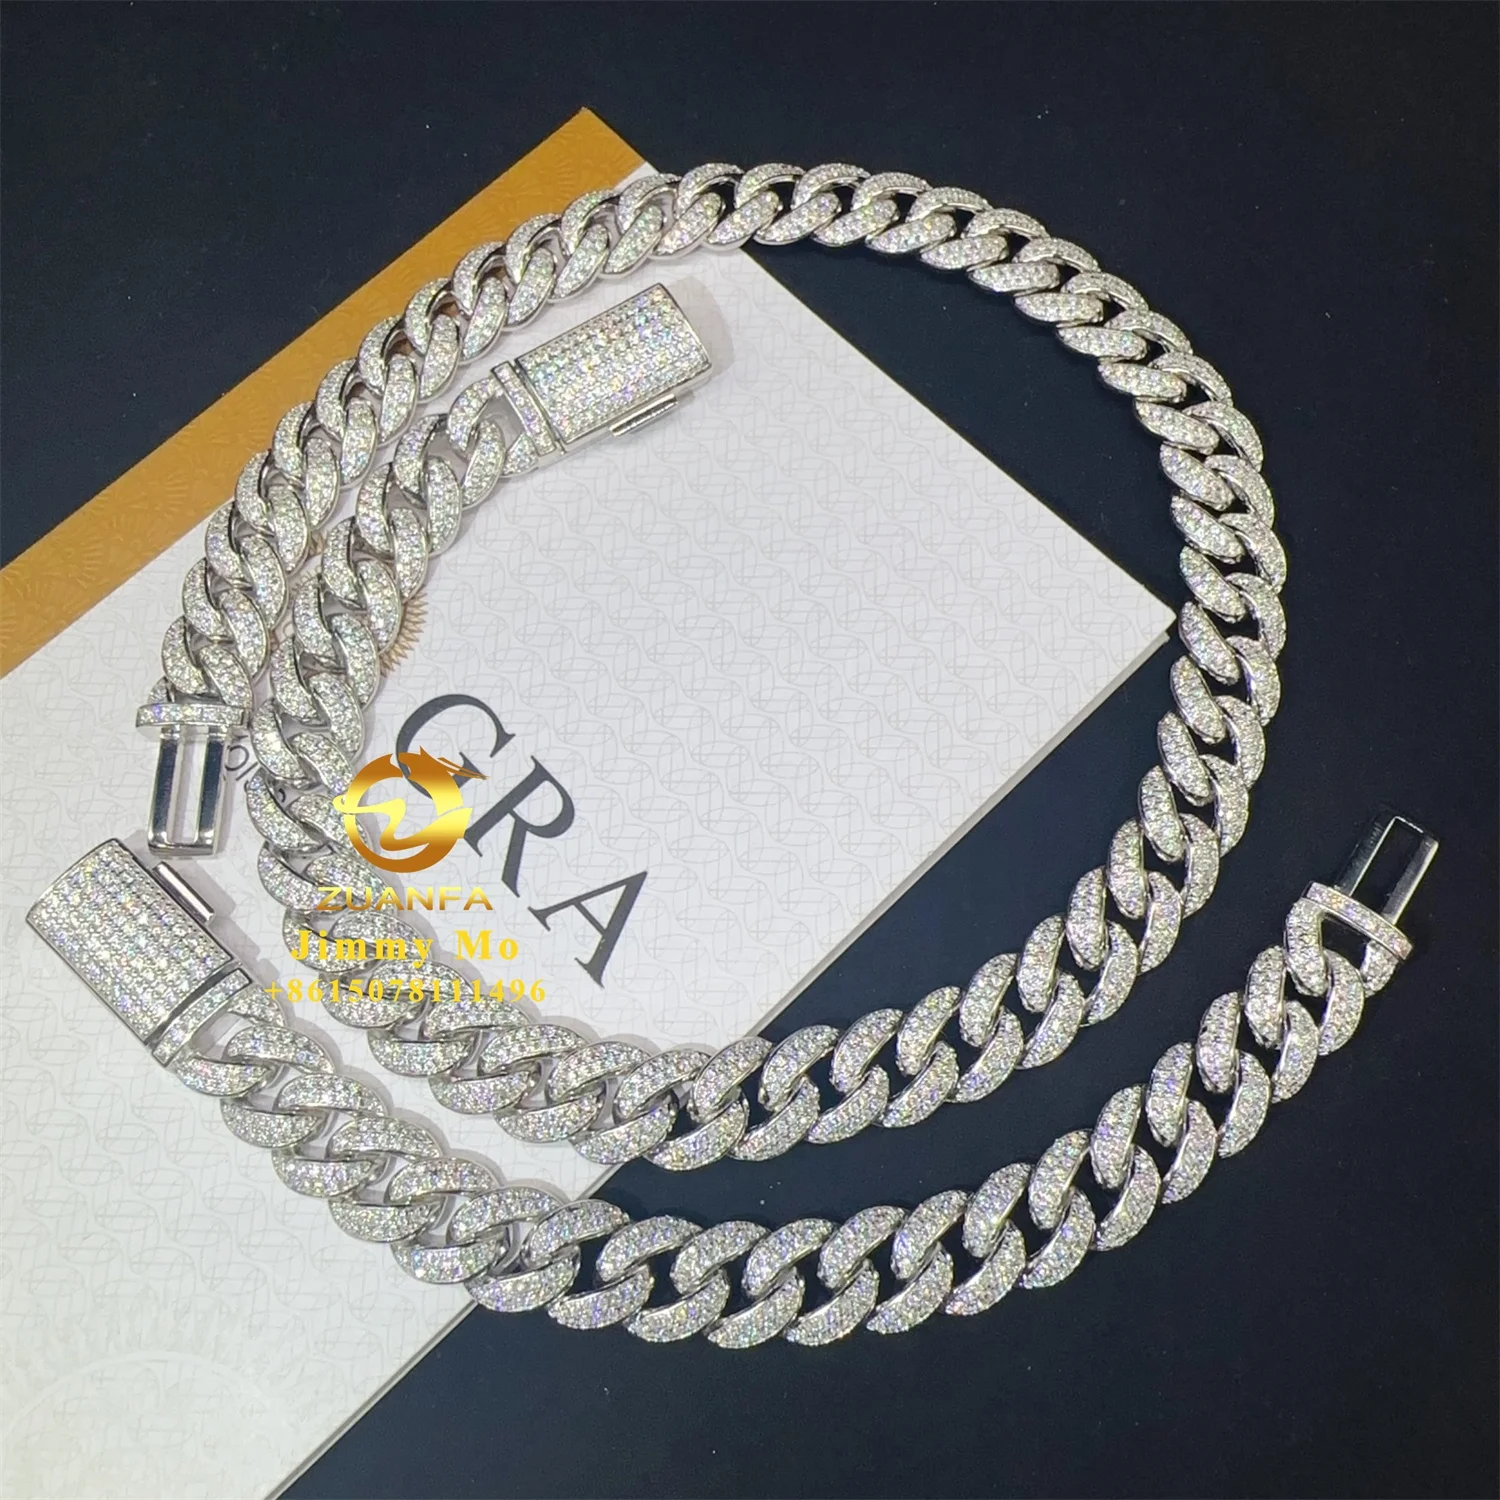 

Best Selling 12mm Two Rows Iced Out Man Hip Hop Jewelry GRA Certificates Pass Diamond Tester VVS1 Moissanite Cuban Link Chain